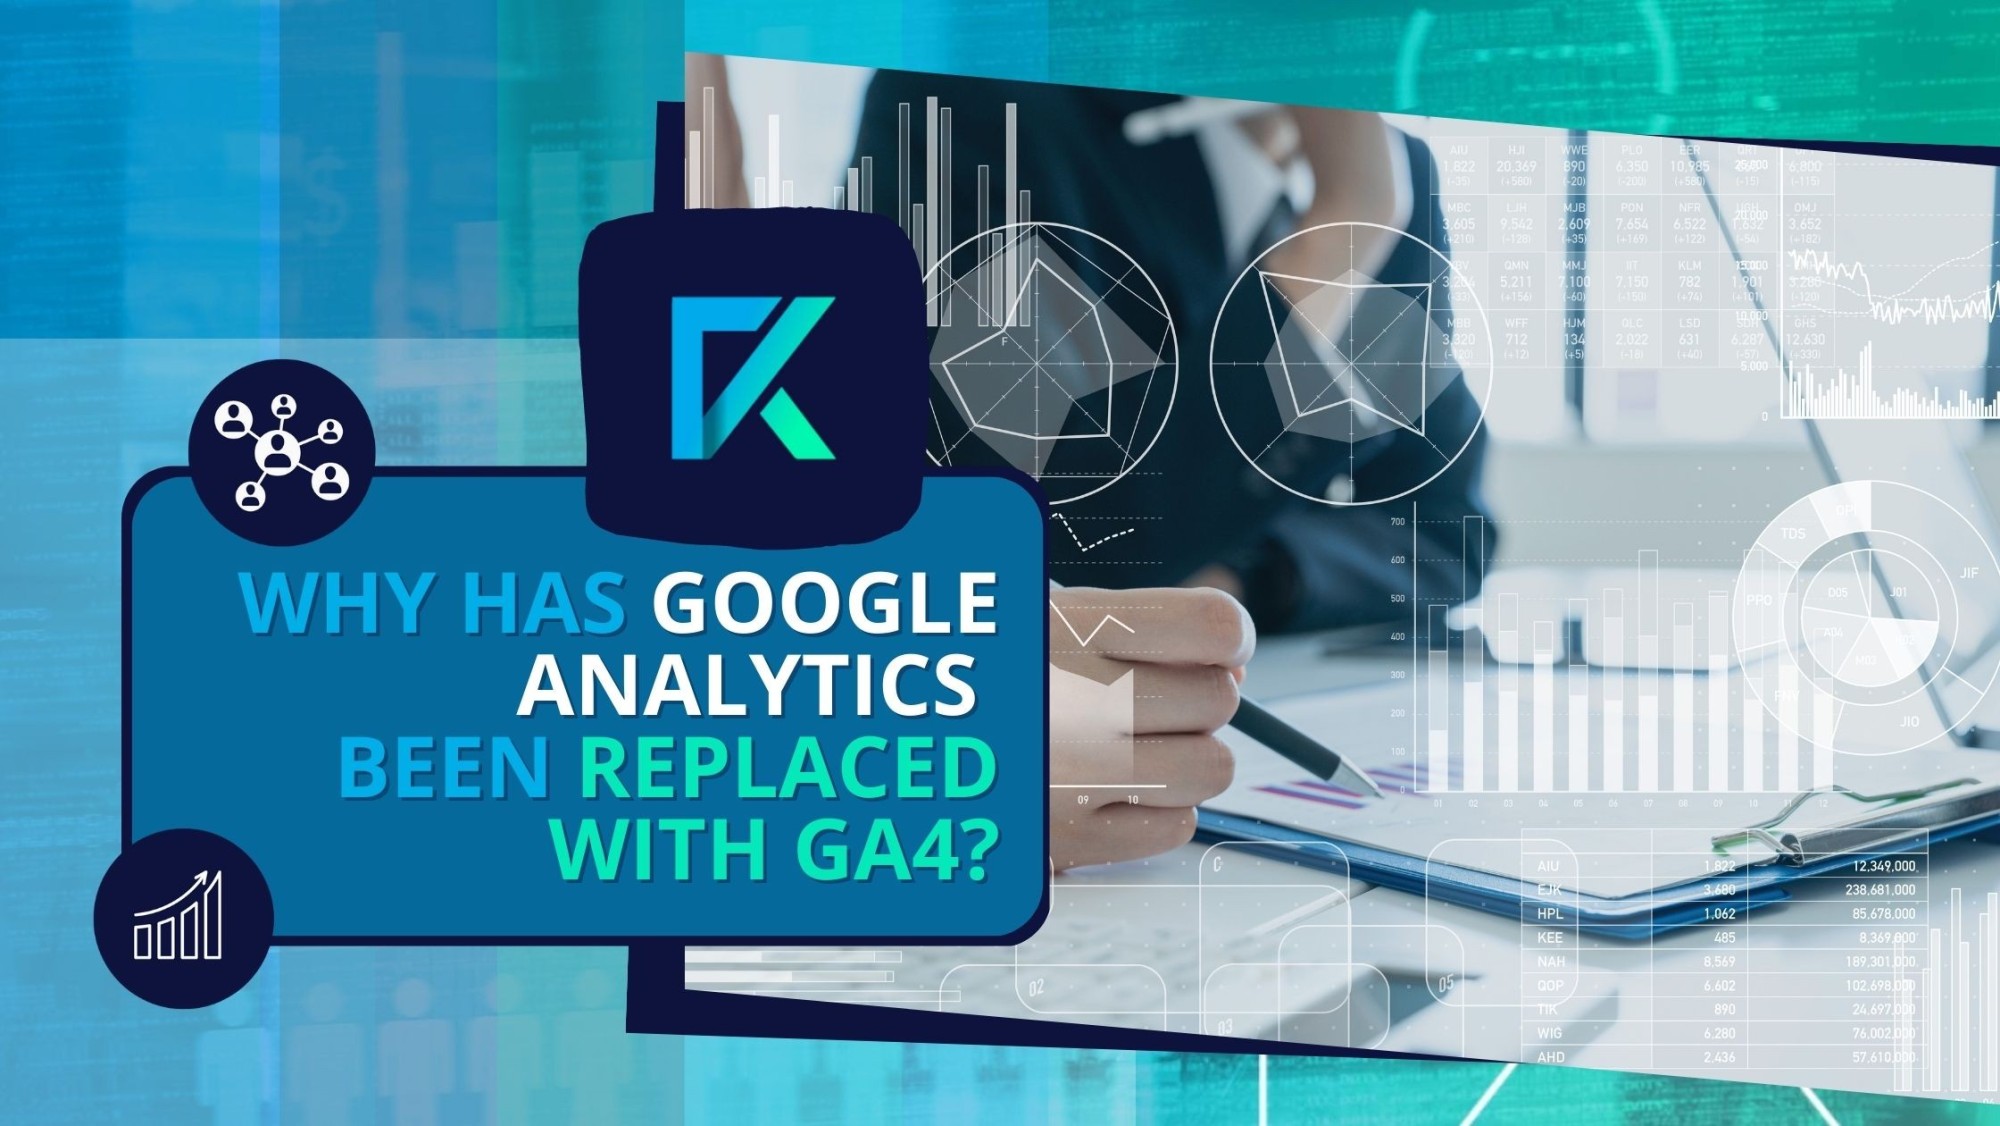 Why has Google Analytics been replaced by GA4?